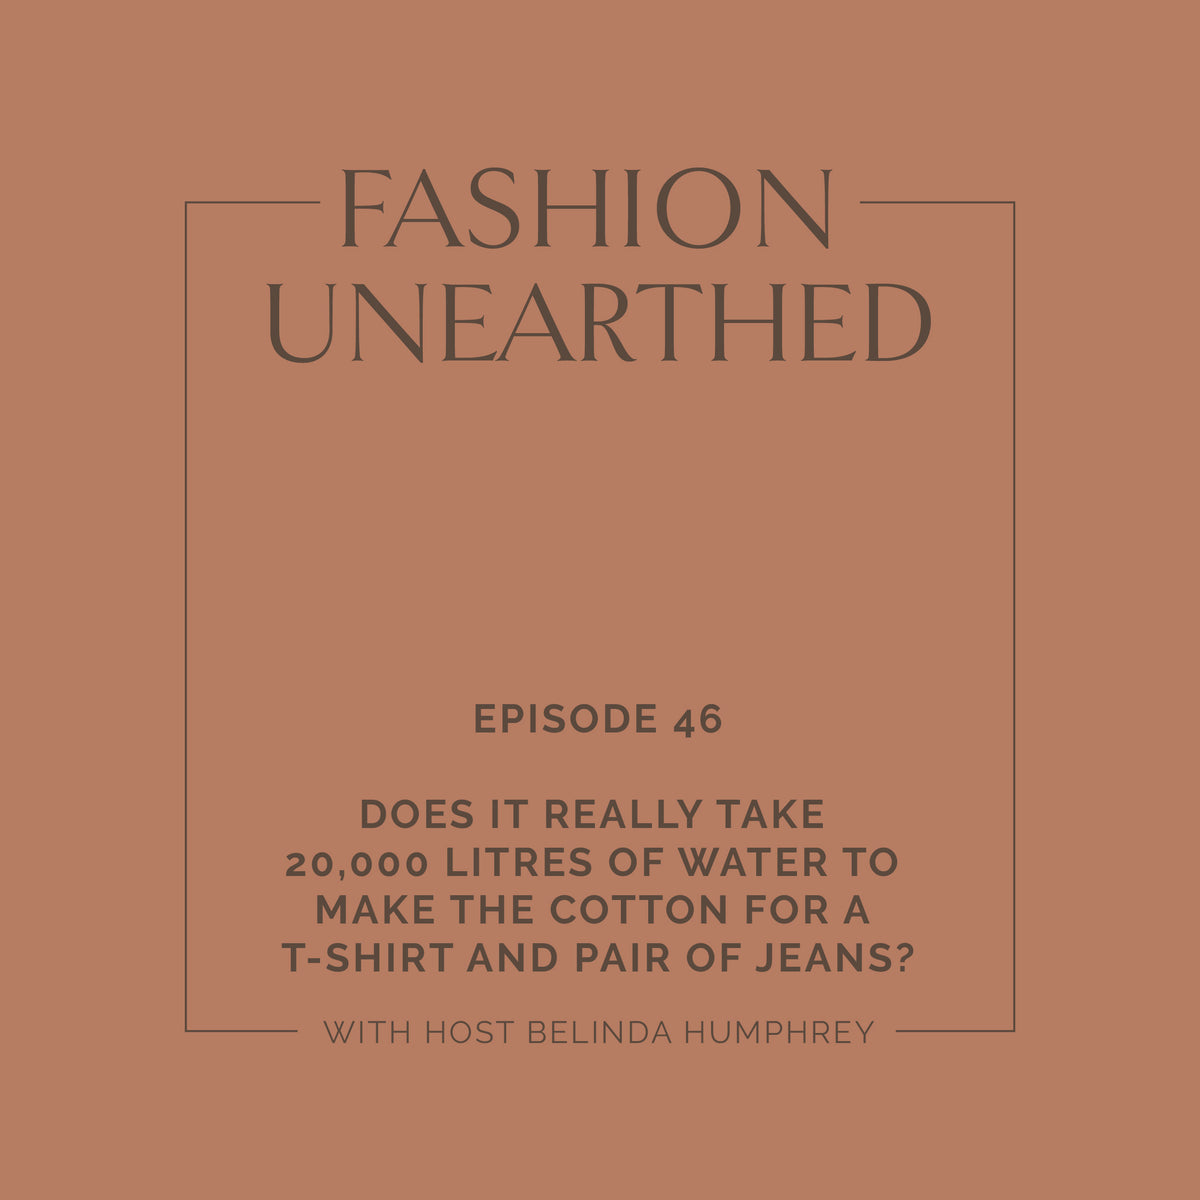 Episode 46: Does it really take 20,000 litres of water to make the cotton for a t-shirt and pair of jeans?